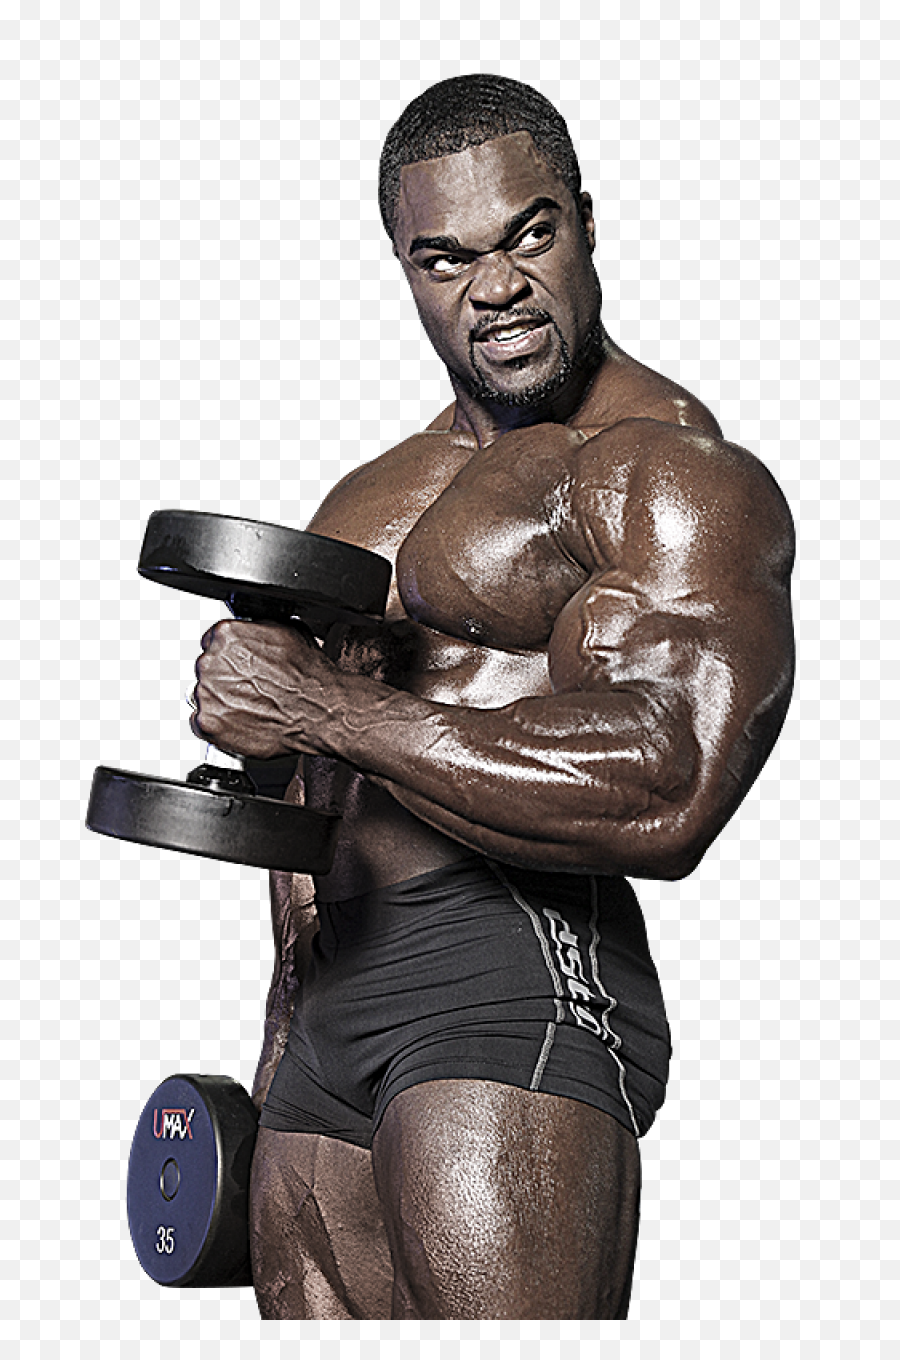 Download Muscle Man Png Image For Free - Muscle Men Png,Body Builder Png